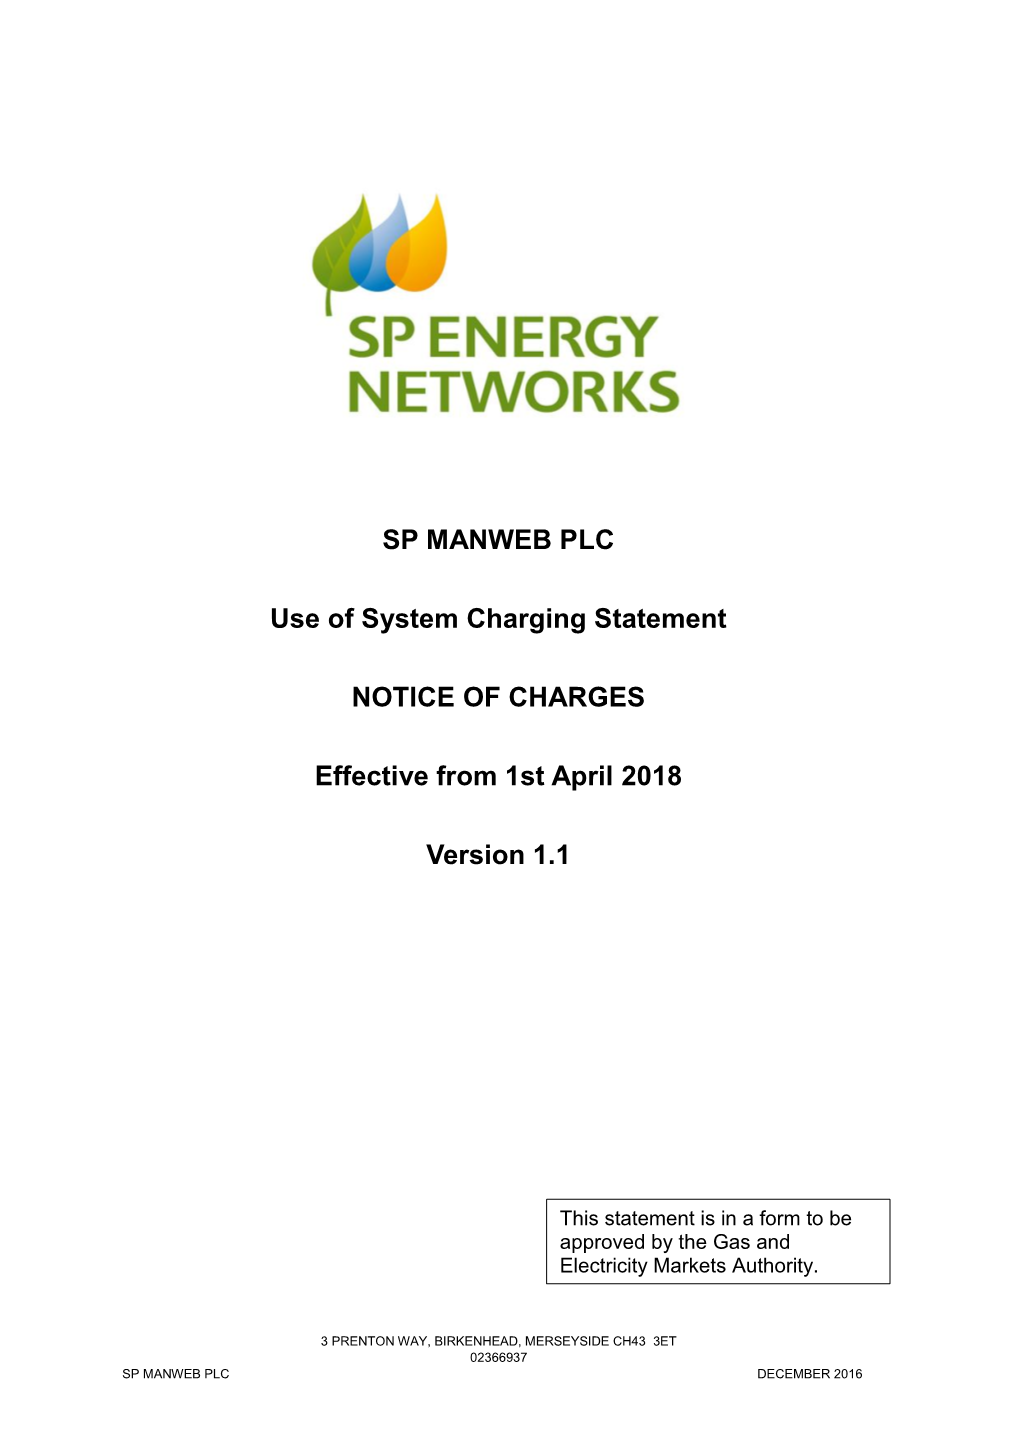 SP MANWEB PLC Use of System Charging